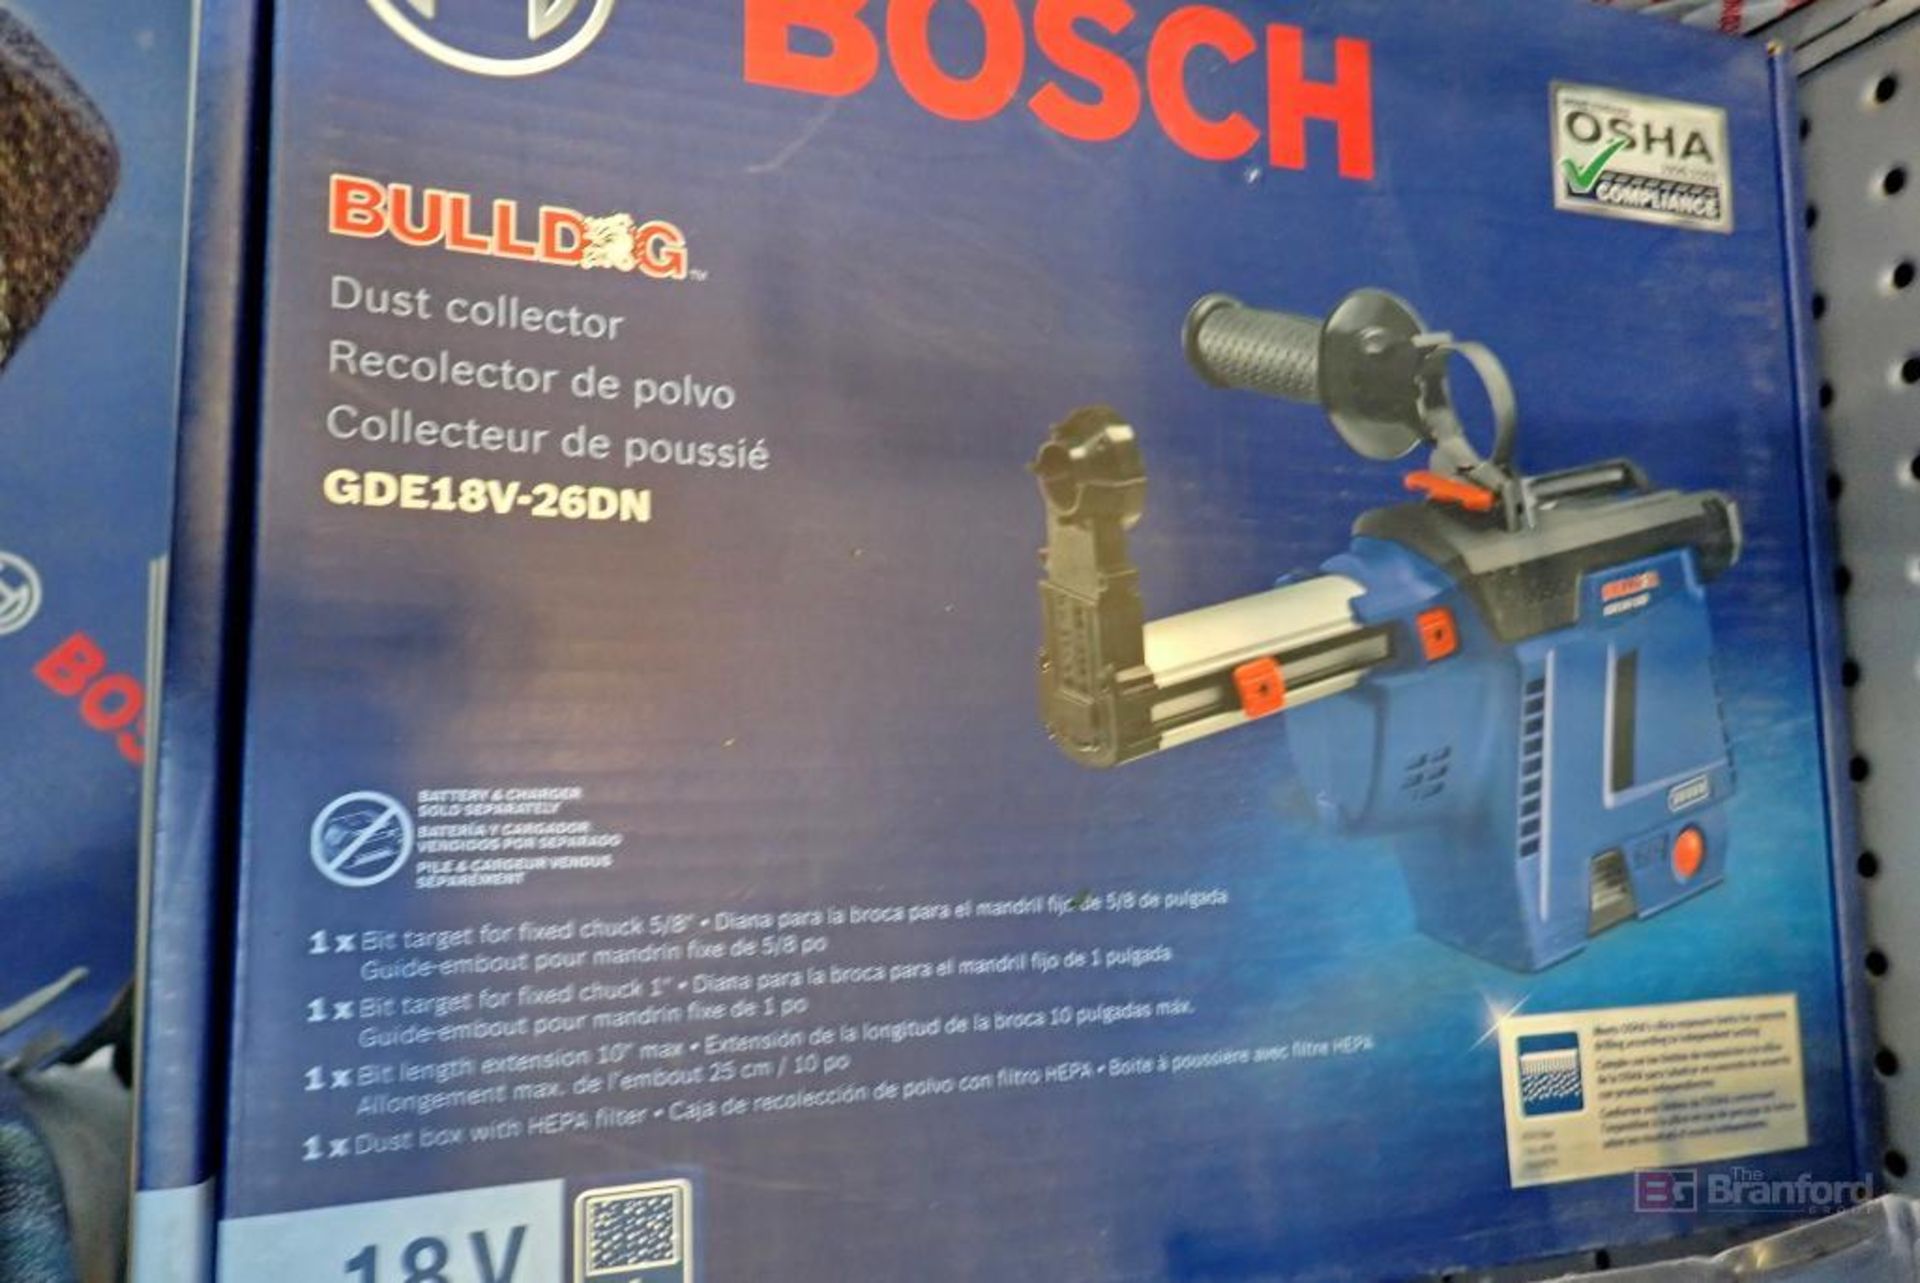 Bosch GDE18V-26DN Dust Collector - Image 2 of 5